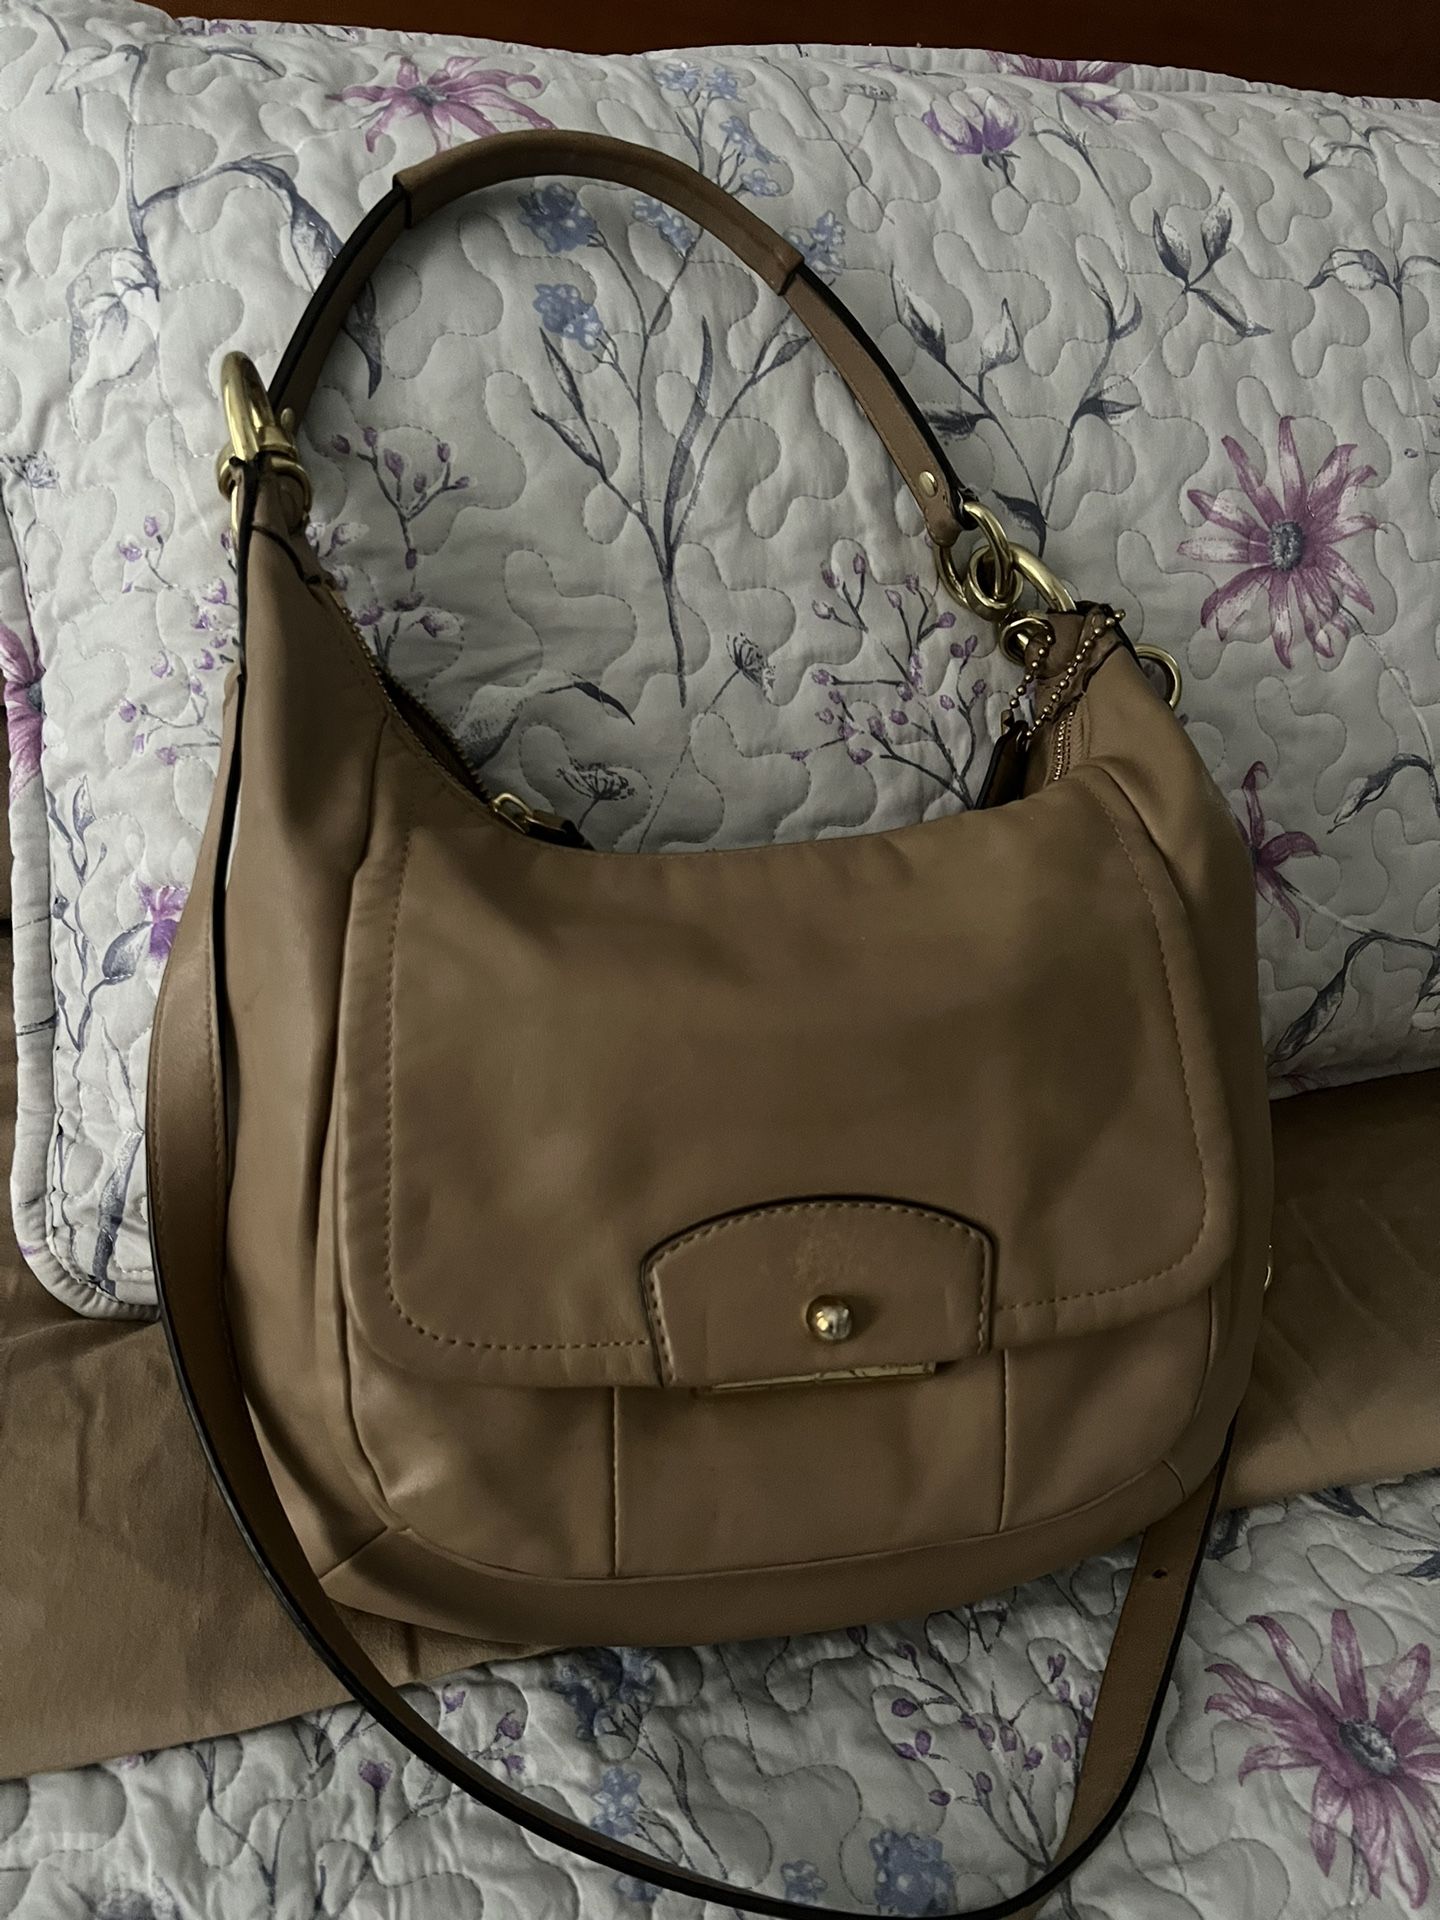 Coach Leather Kristin Hobo Bag Purse -F22306 Convertible Crossbody Tan Satchel In Excellent Condition 